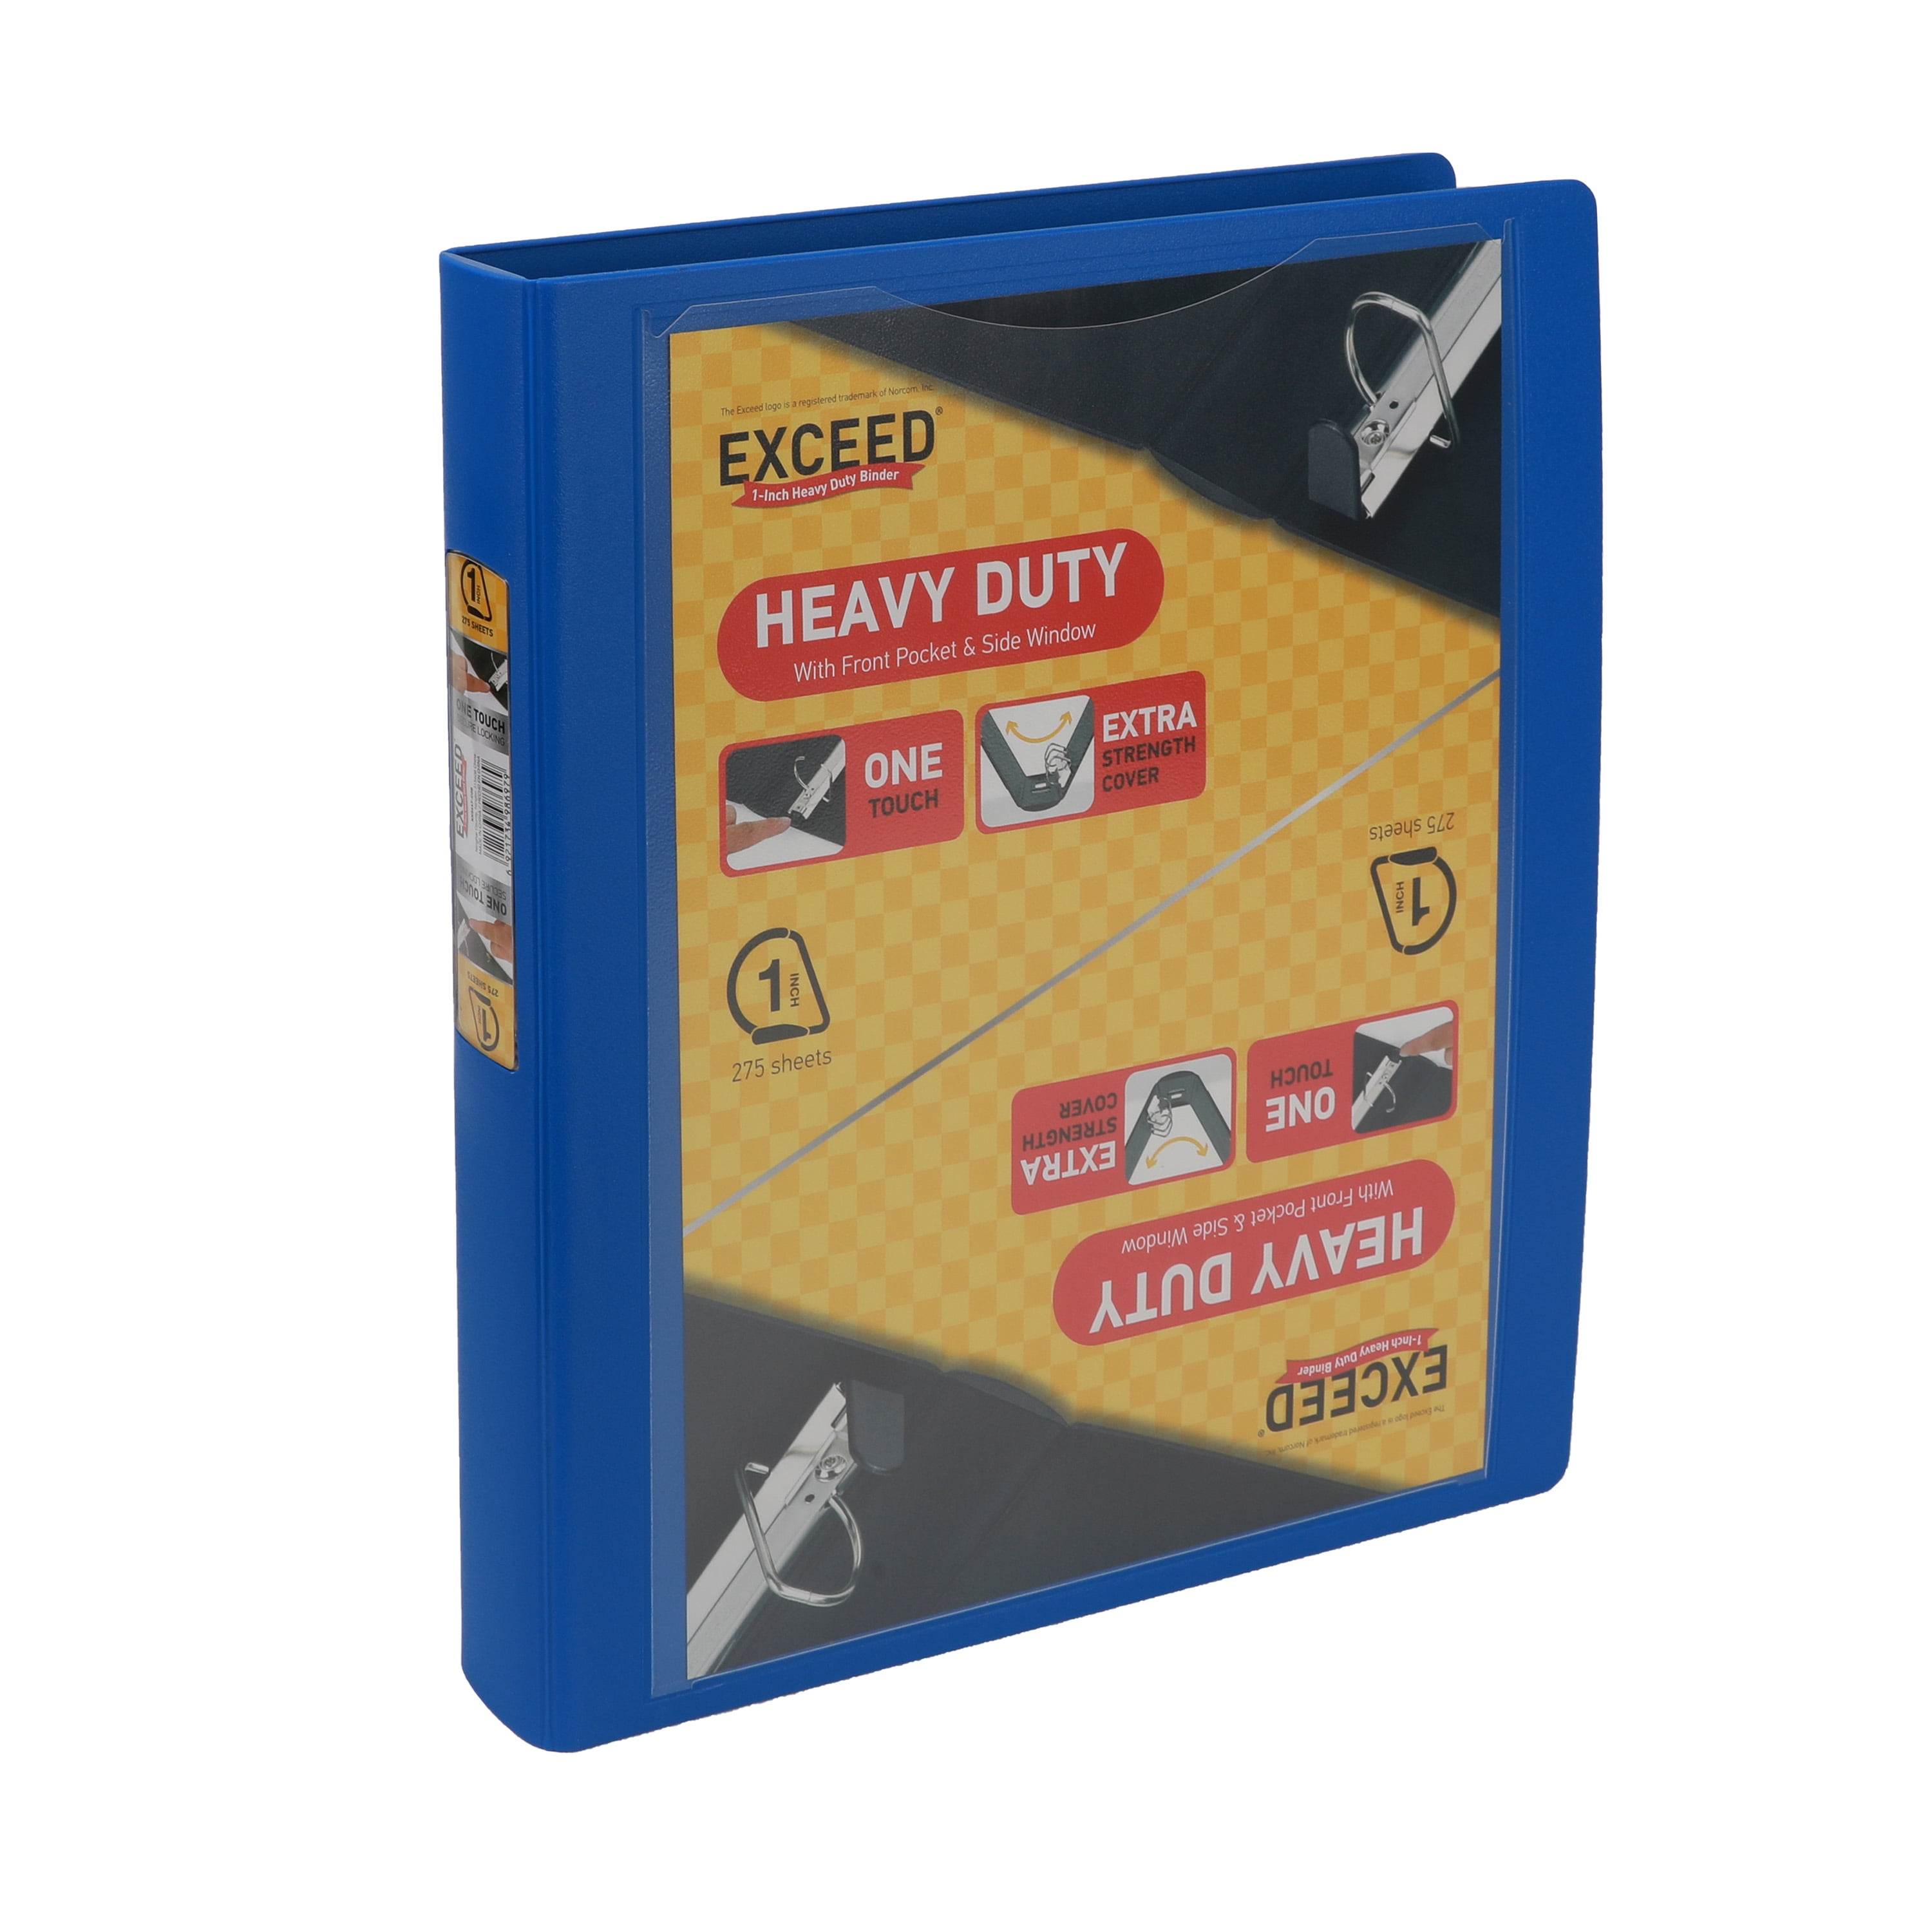 BINDERS EXCEED 1 INCH HEAVY DUTY BINDER Blue D RING HOLDS 275 SHEETS  2 Pack 